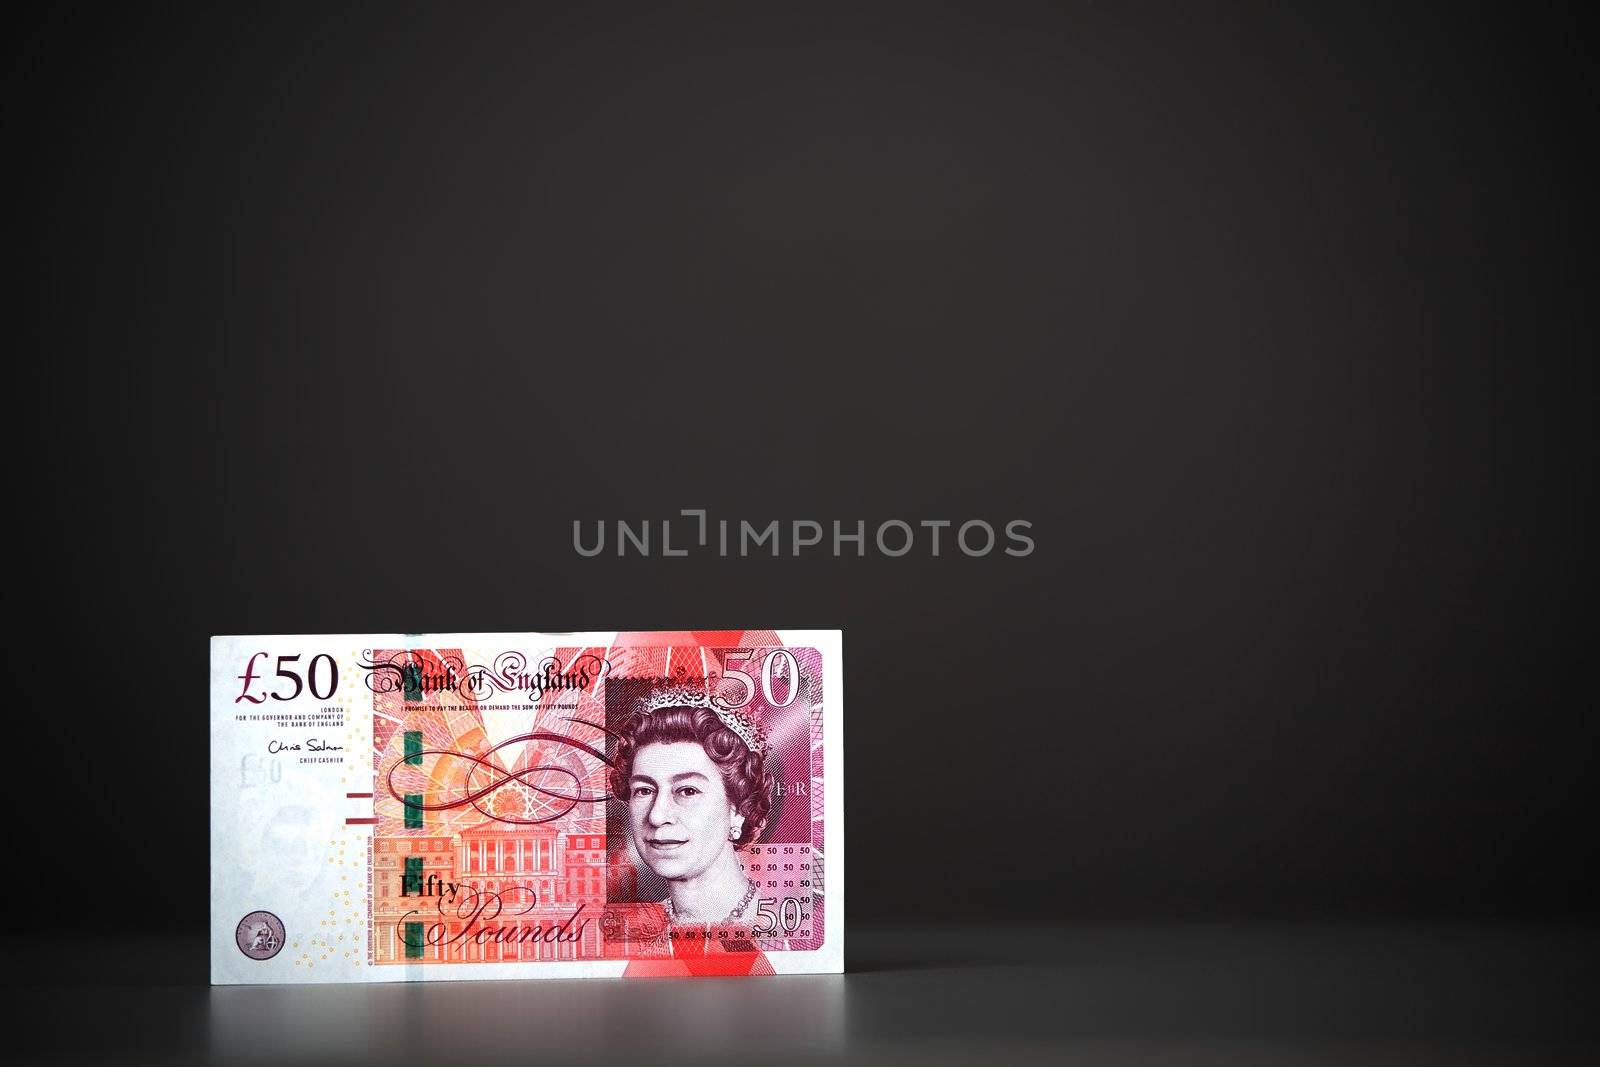 The Fifty pounds sterling. On a gray background